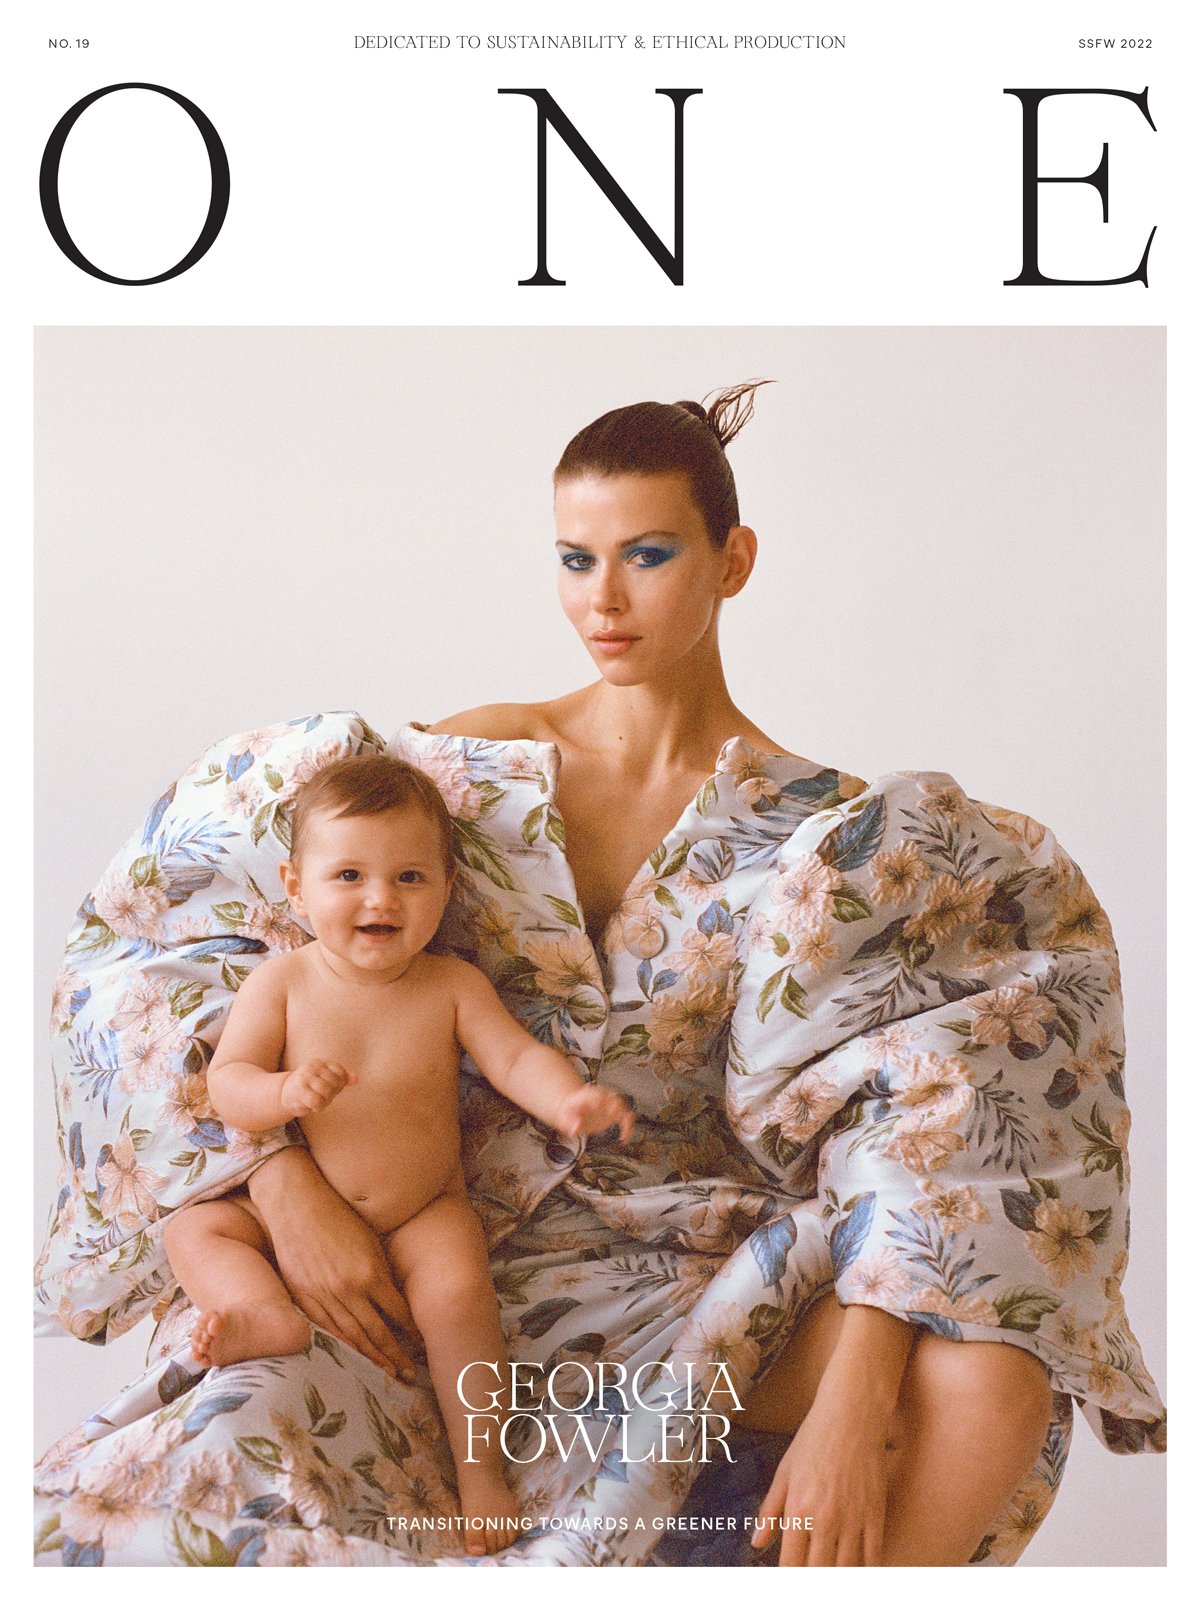 ONE_NO19-Cover2.jpg